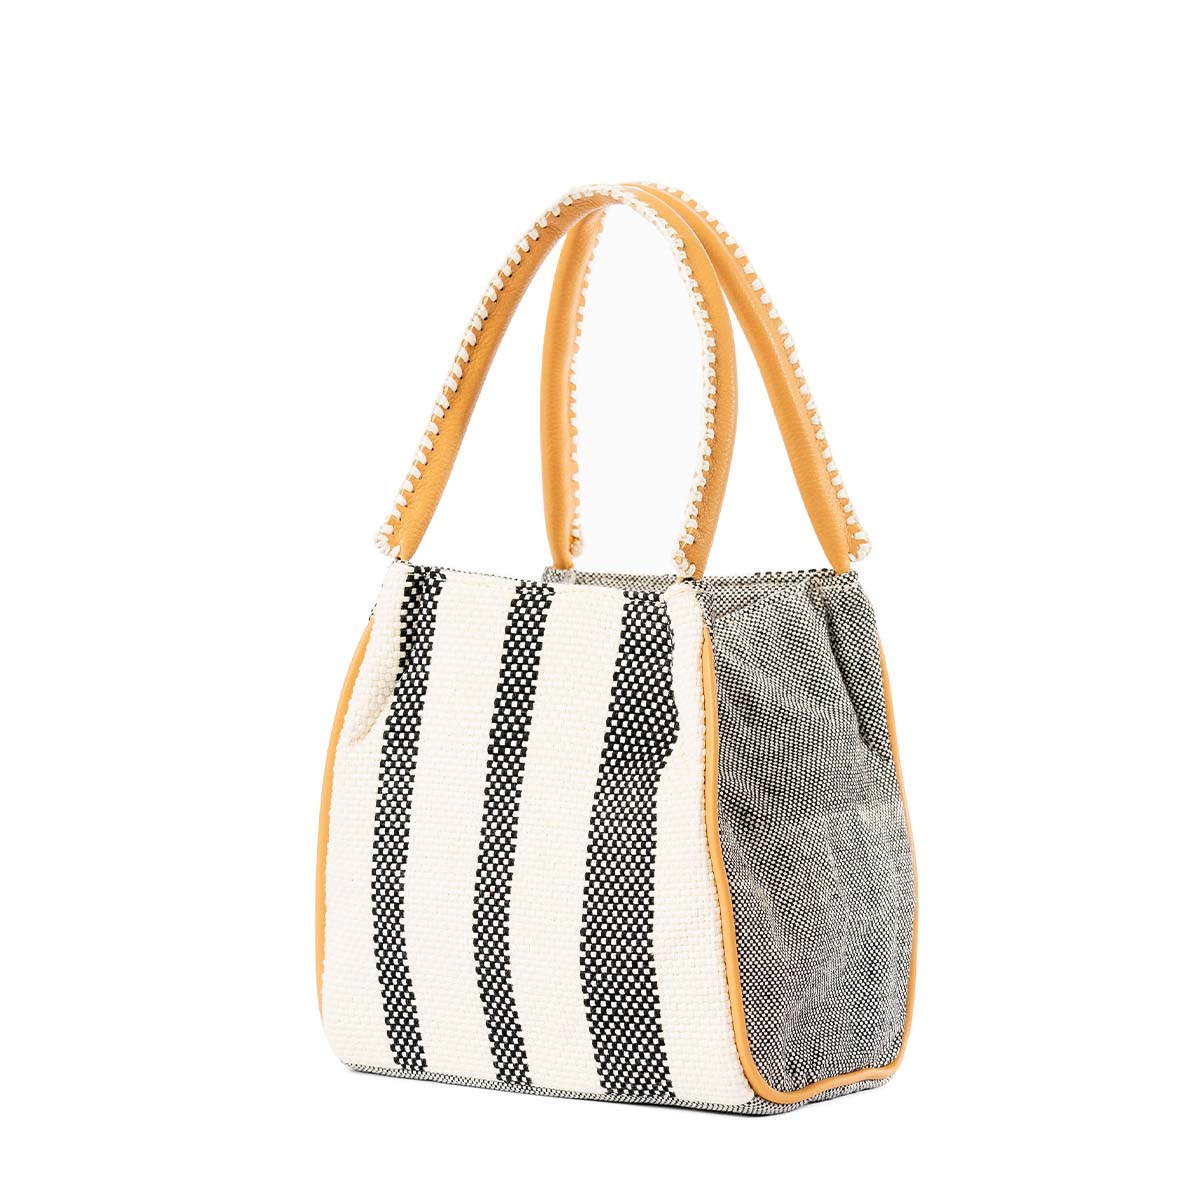 Right-sided angle of the artisan hand woven Flora Petite Tote in Tourmaline pattern. It has vertical white and black stripes. It has leather handles with white embroidery. The sides have a solid woven grey color.